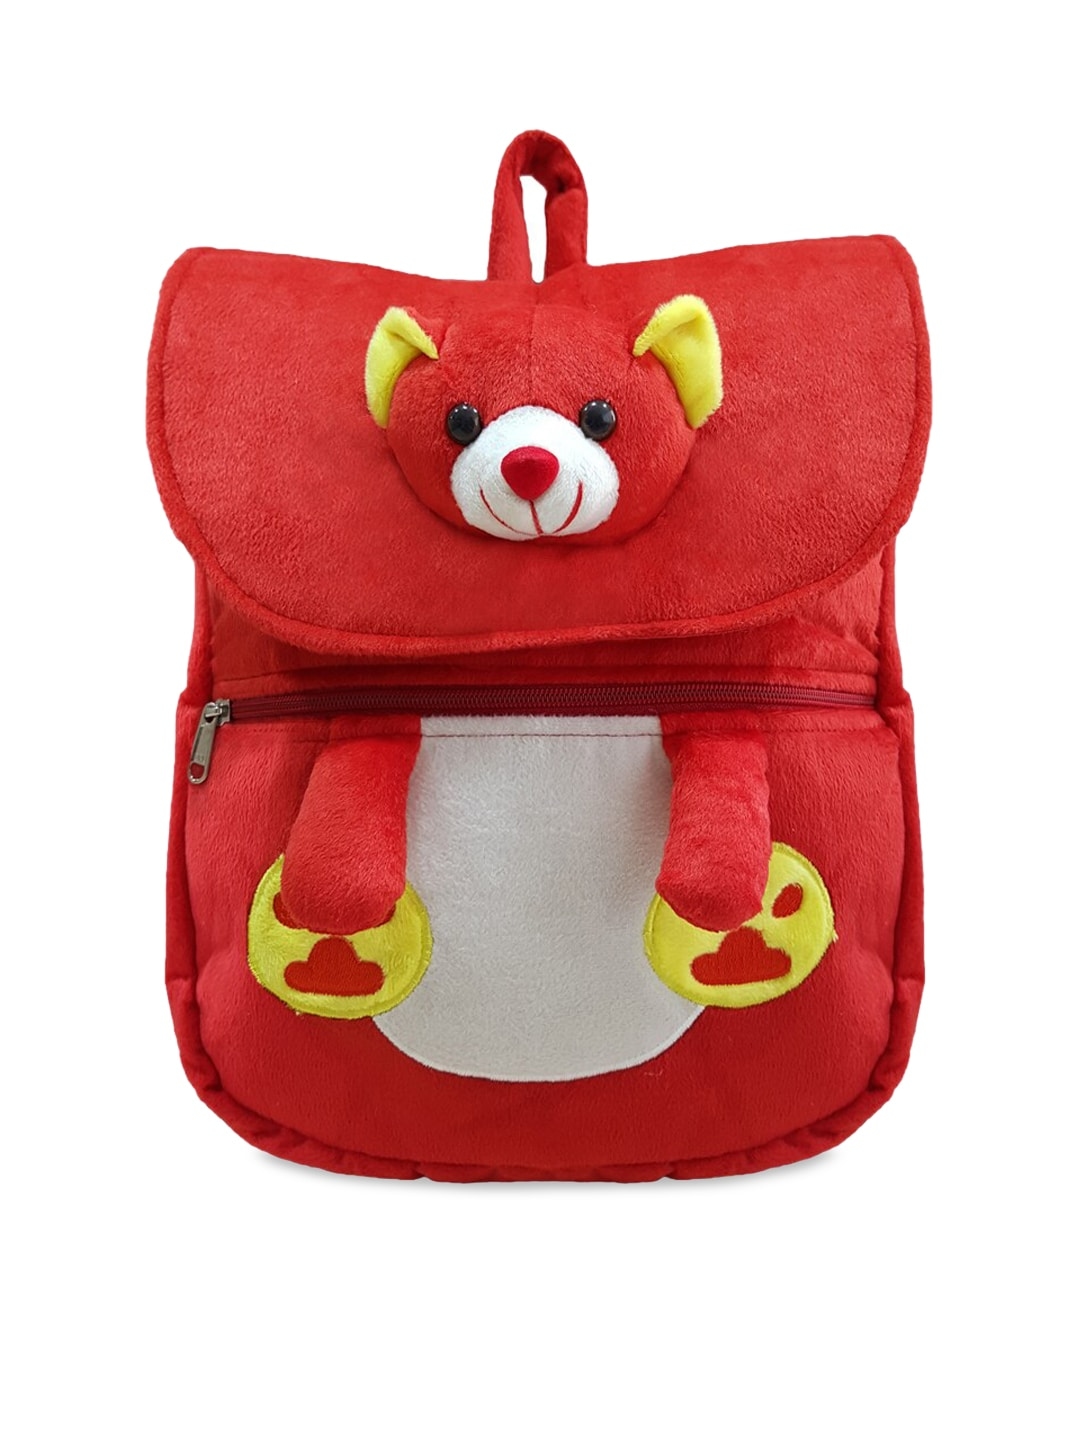 Ultra Kids Red Teddy Face Plush Soft Backpack Toy